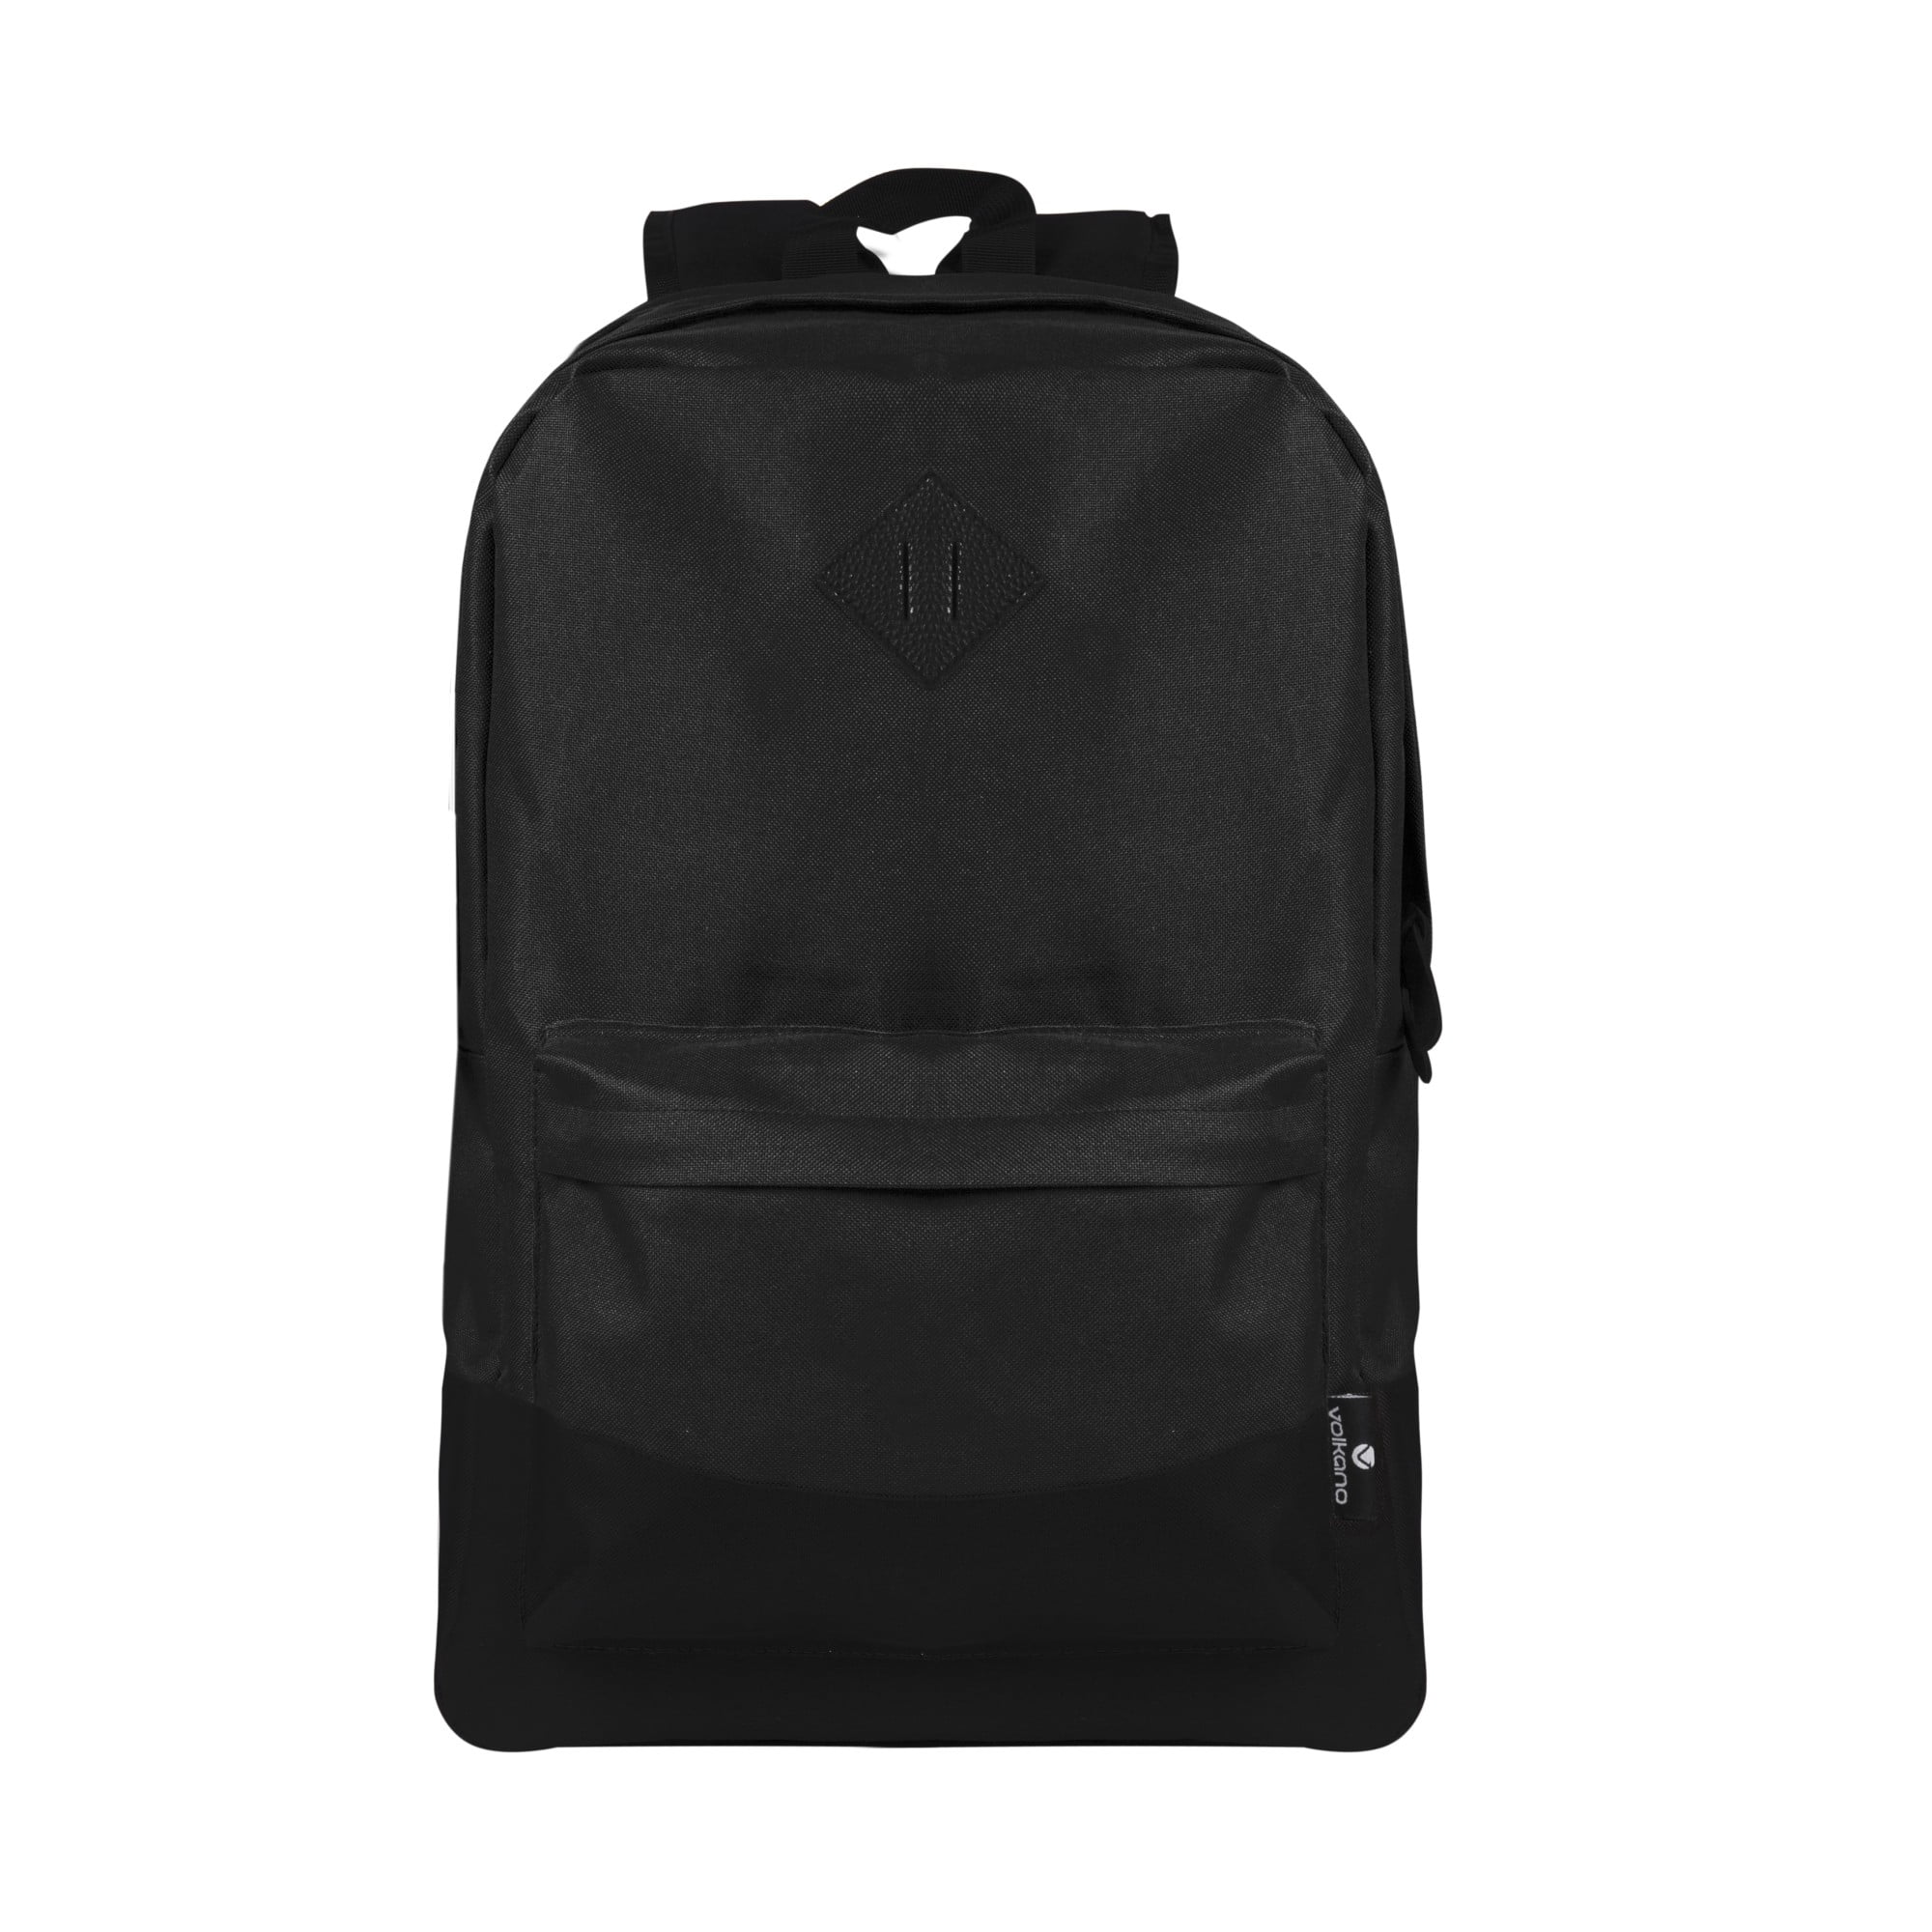 EXO Bags Teens Daily Backpack New Arrival Surprise Gift Mochila Star Laptop  Bags Travel Students School Bag For Galaxy Backpacks